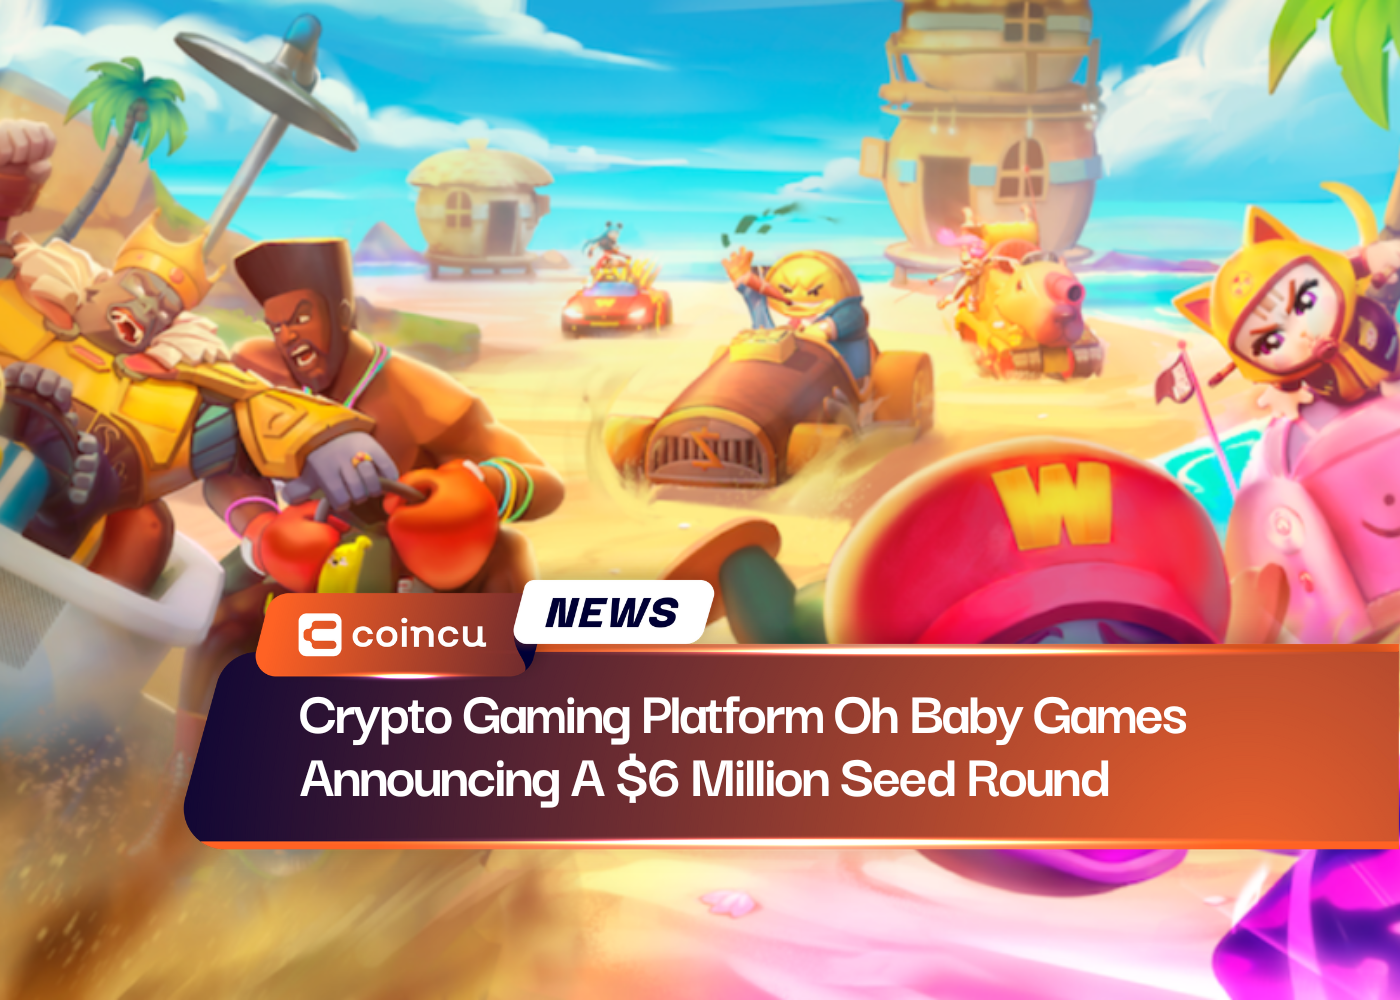 Crypto Gaming Platform Oh Baby Games Announcing A $6 Million Seed Round